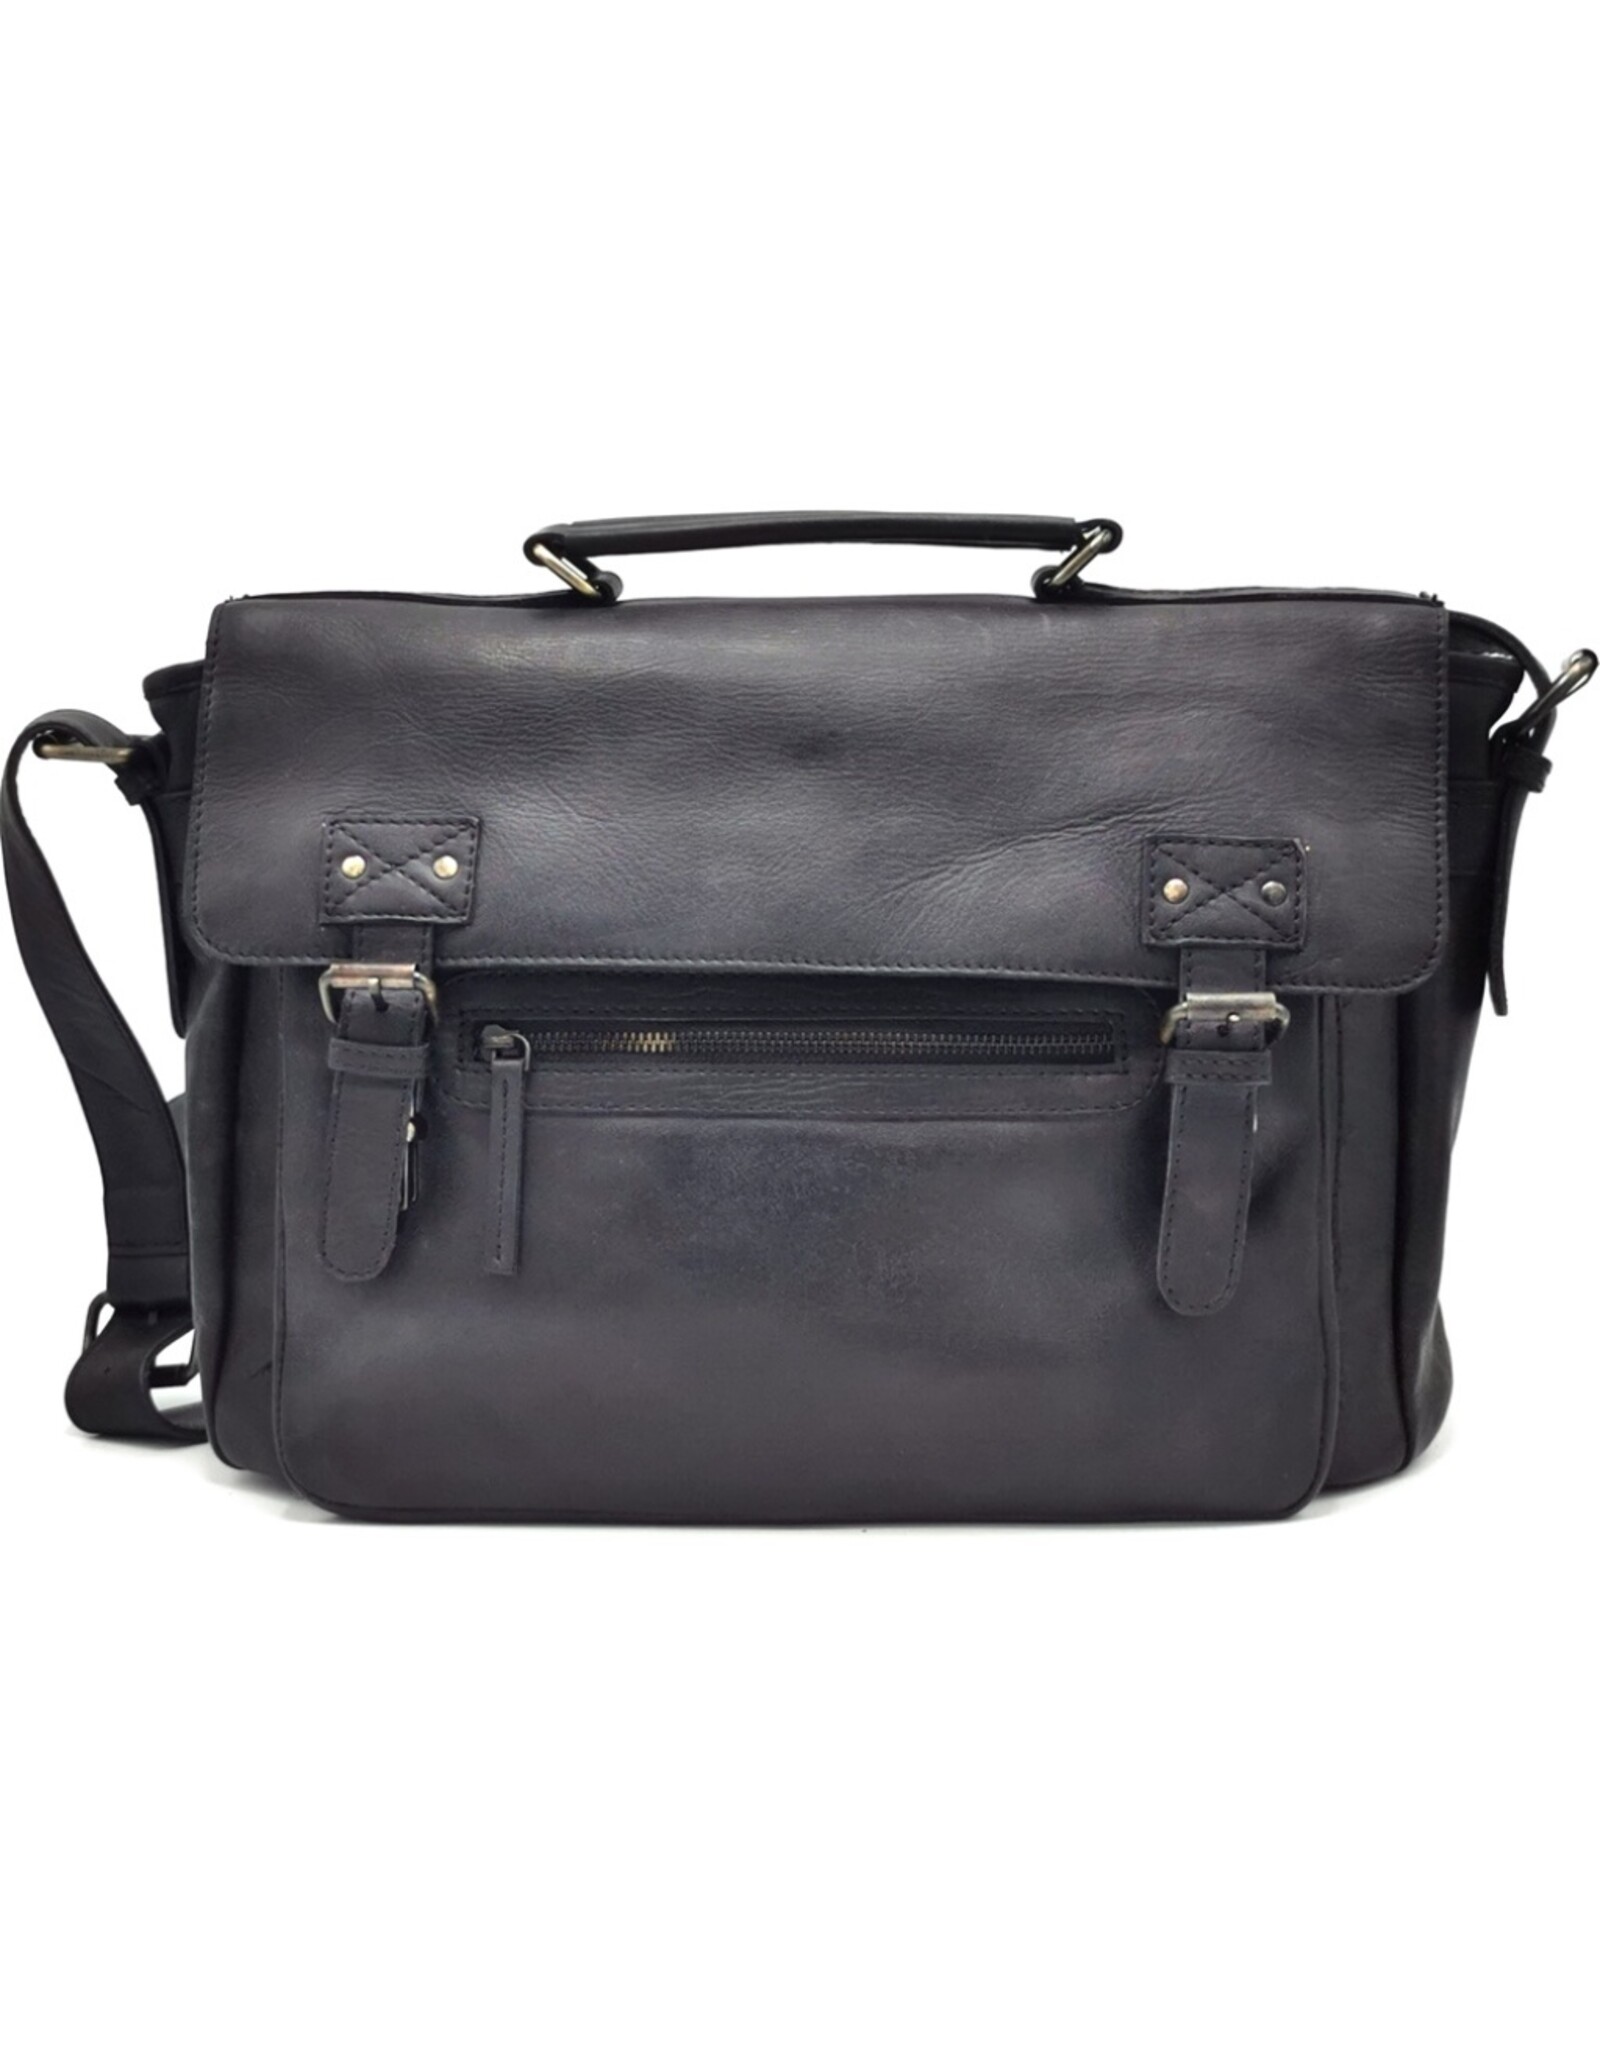 LandLeder Leather bags - Casual Briefcase CAMBRIDGE Washed Leather